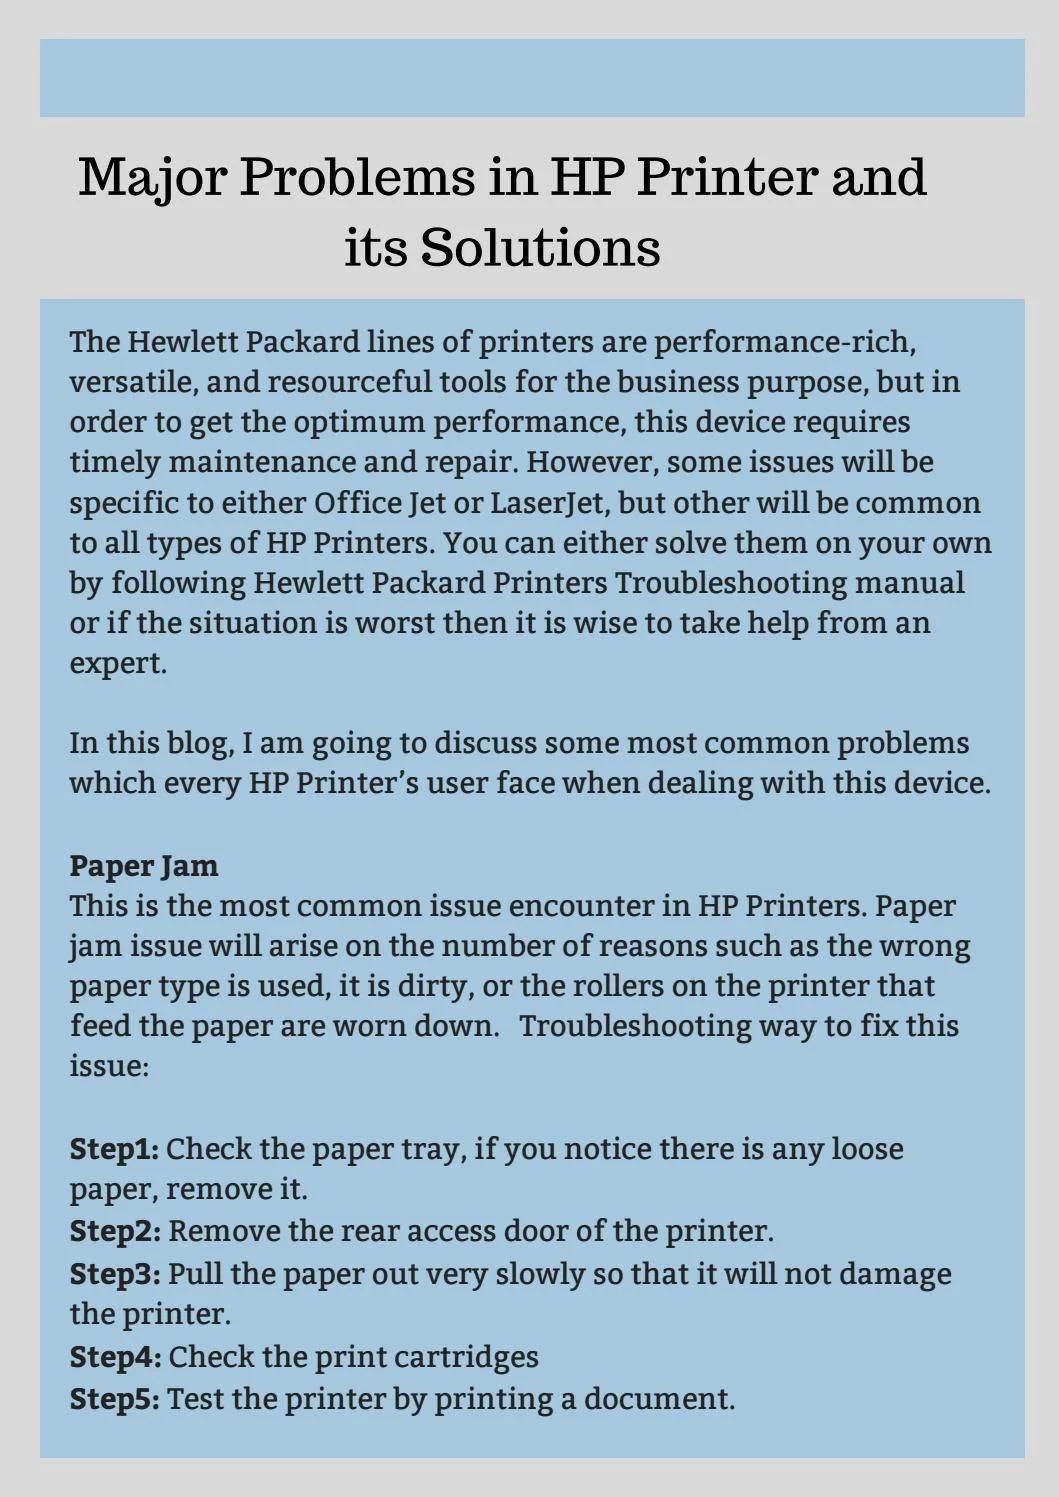 hewlett packard printing problems - How do I get my HP printer to print again